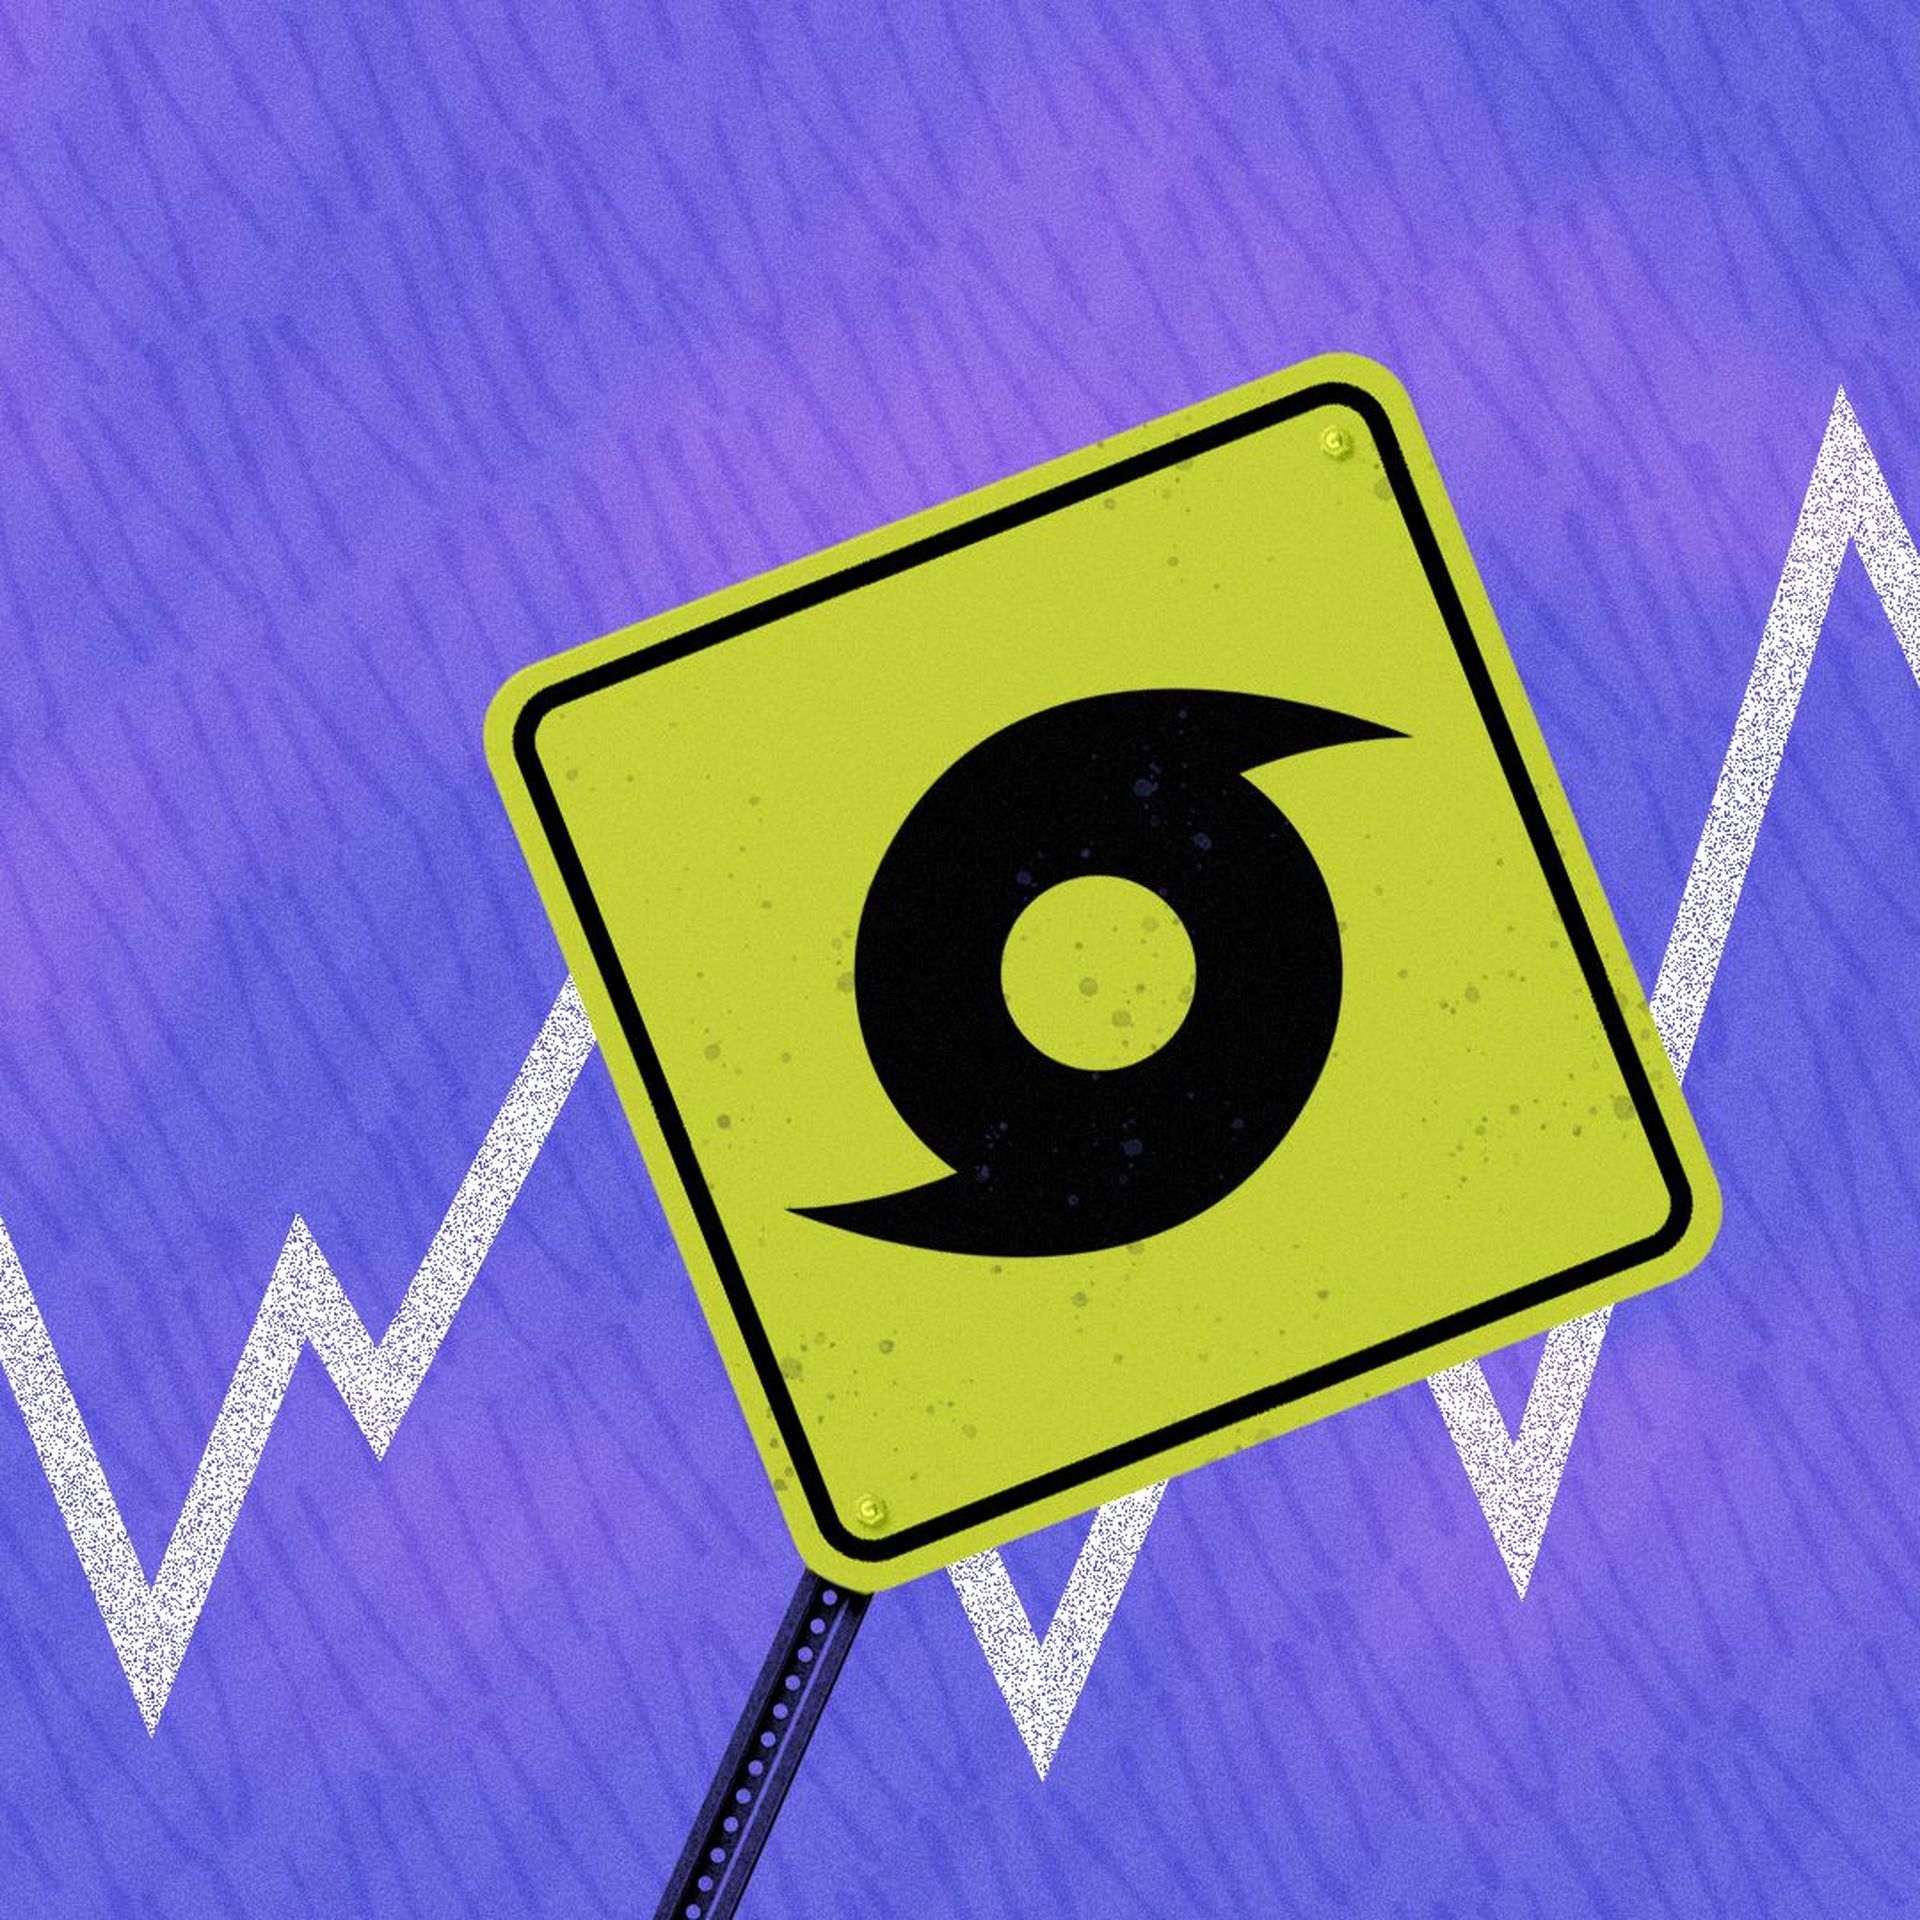 Illustration of a road sign with a hurricane icon on it in a storm